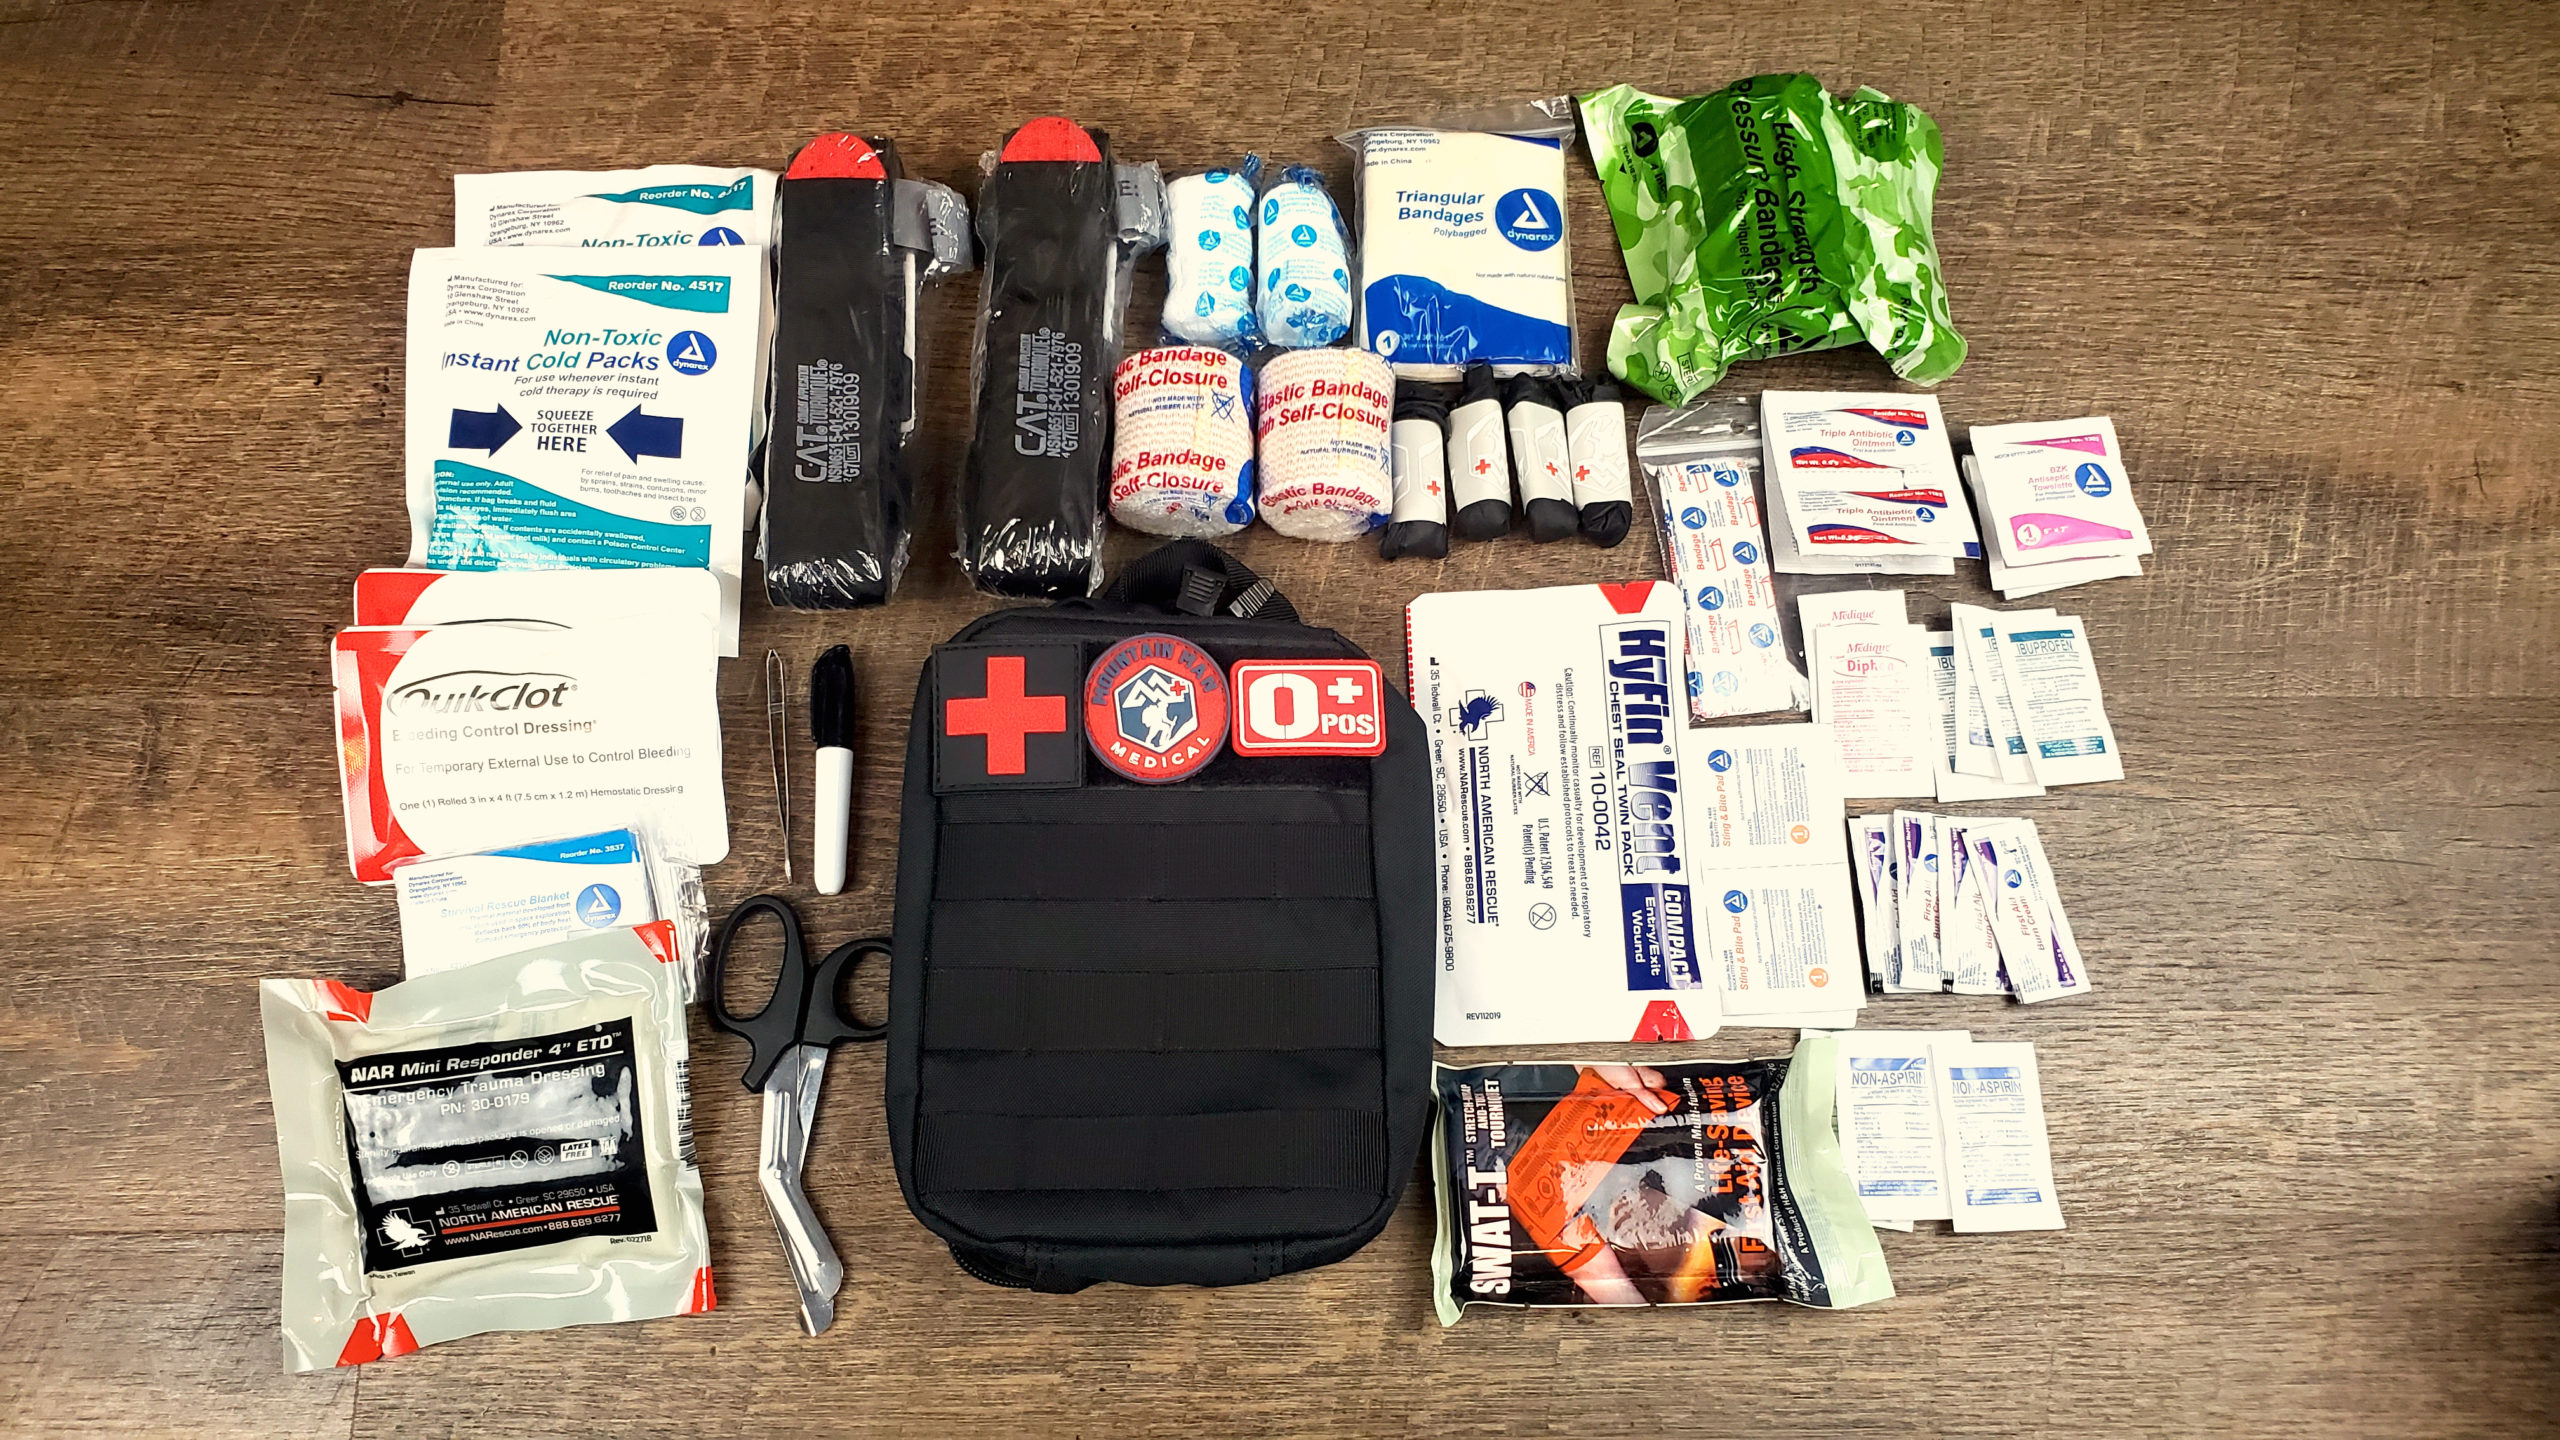 The Wind River Trauma and First-Aid Kit